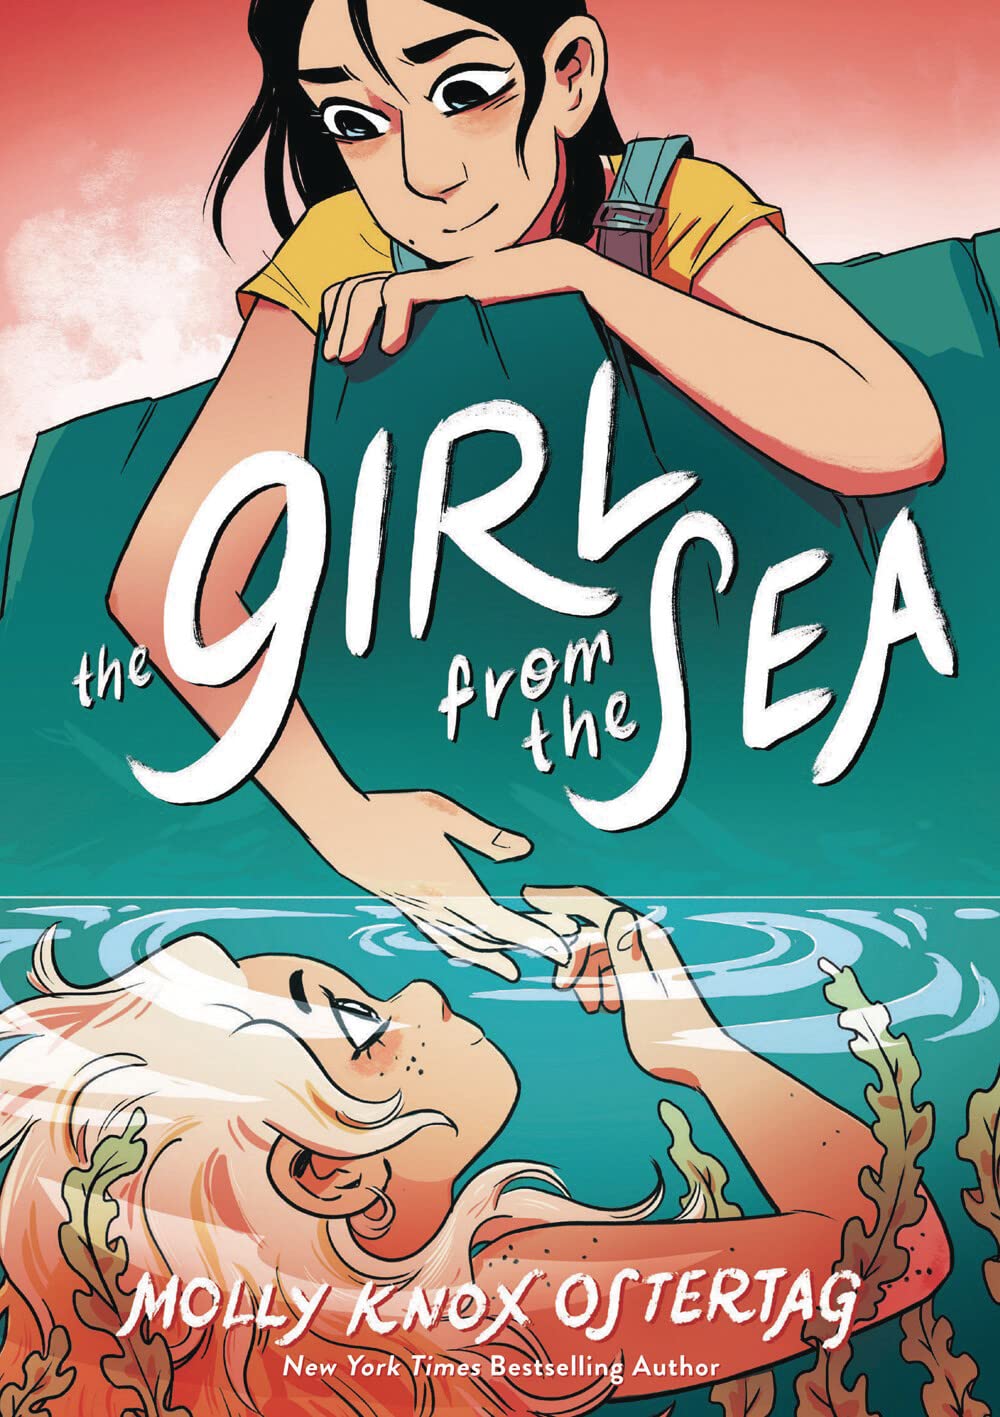 The Girl from the Sea: A Graphic Novel - Molly Knox Ostertag (Pre-Loved)